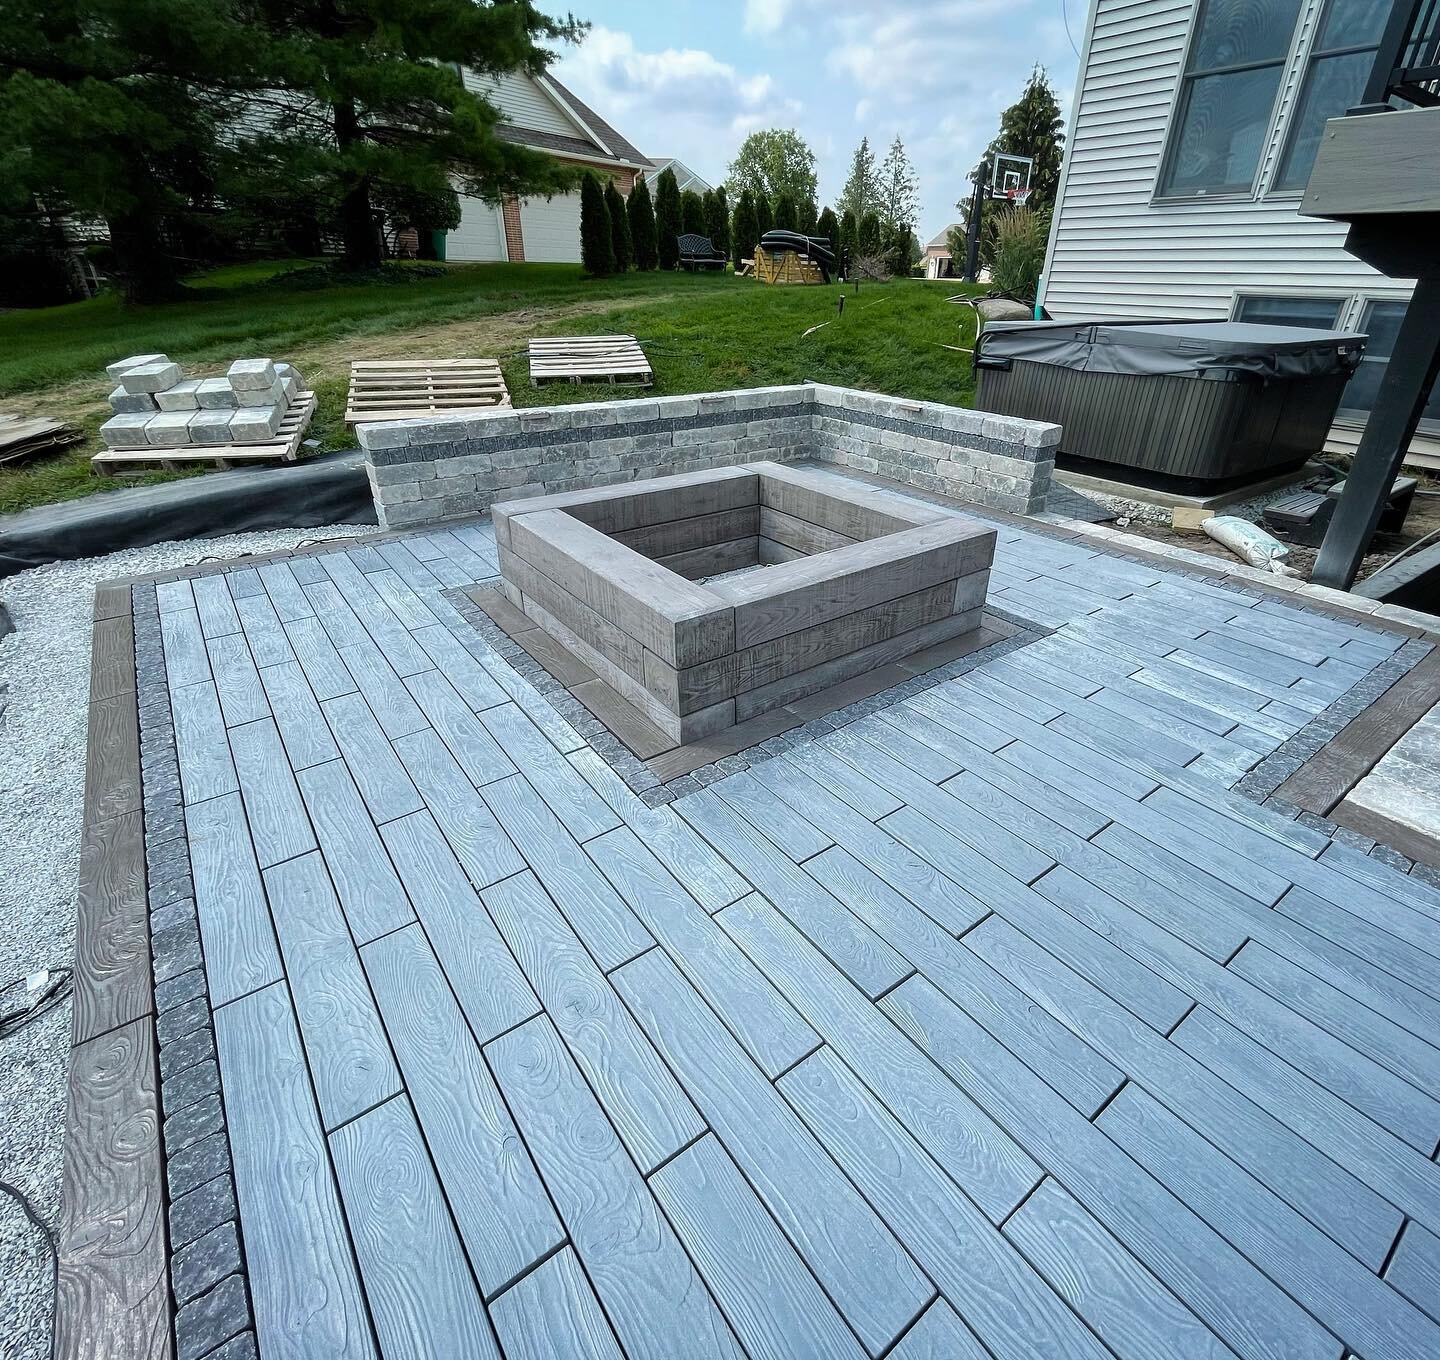 Mixing up a little sauce and pouring it all over this backyard! @techobloc Borealis slabs and wall block coming in HOT!! Hopefully finishing up this one tomorrow afternoon!